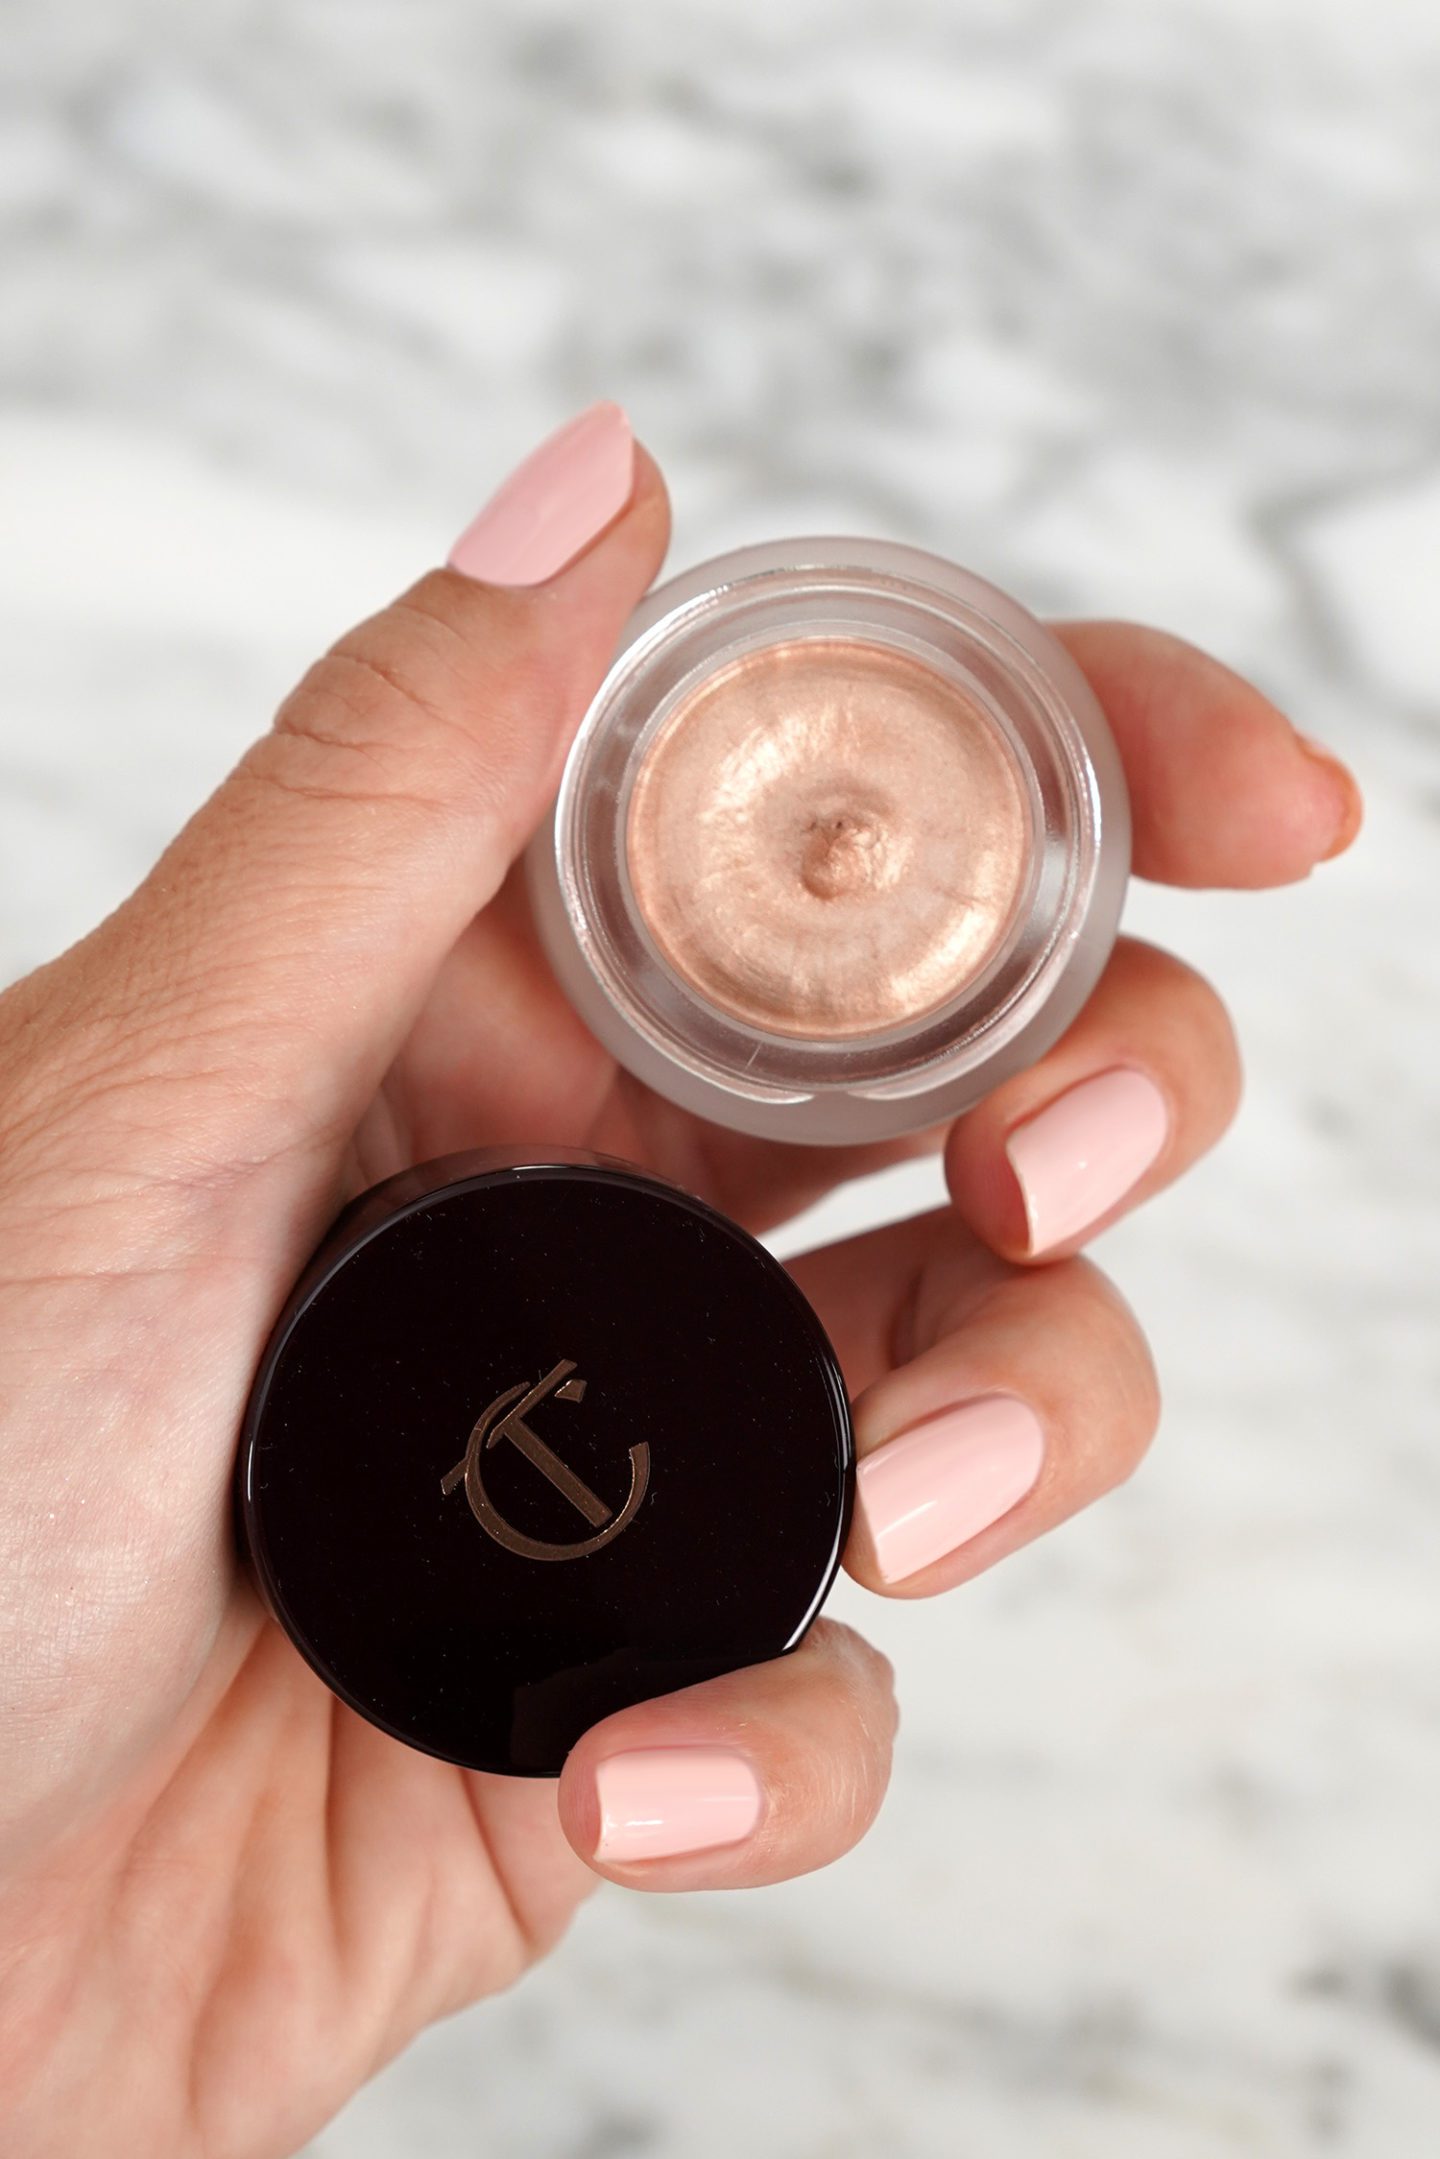 Charlotte Tilbury Eyes to Mesmerize Cream Shadow in Champagne 